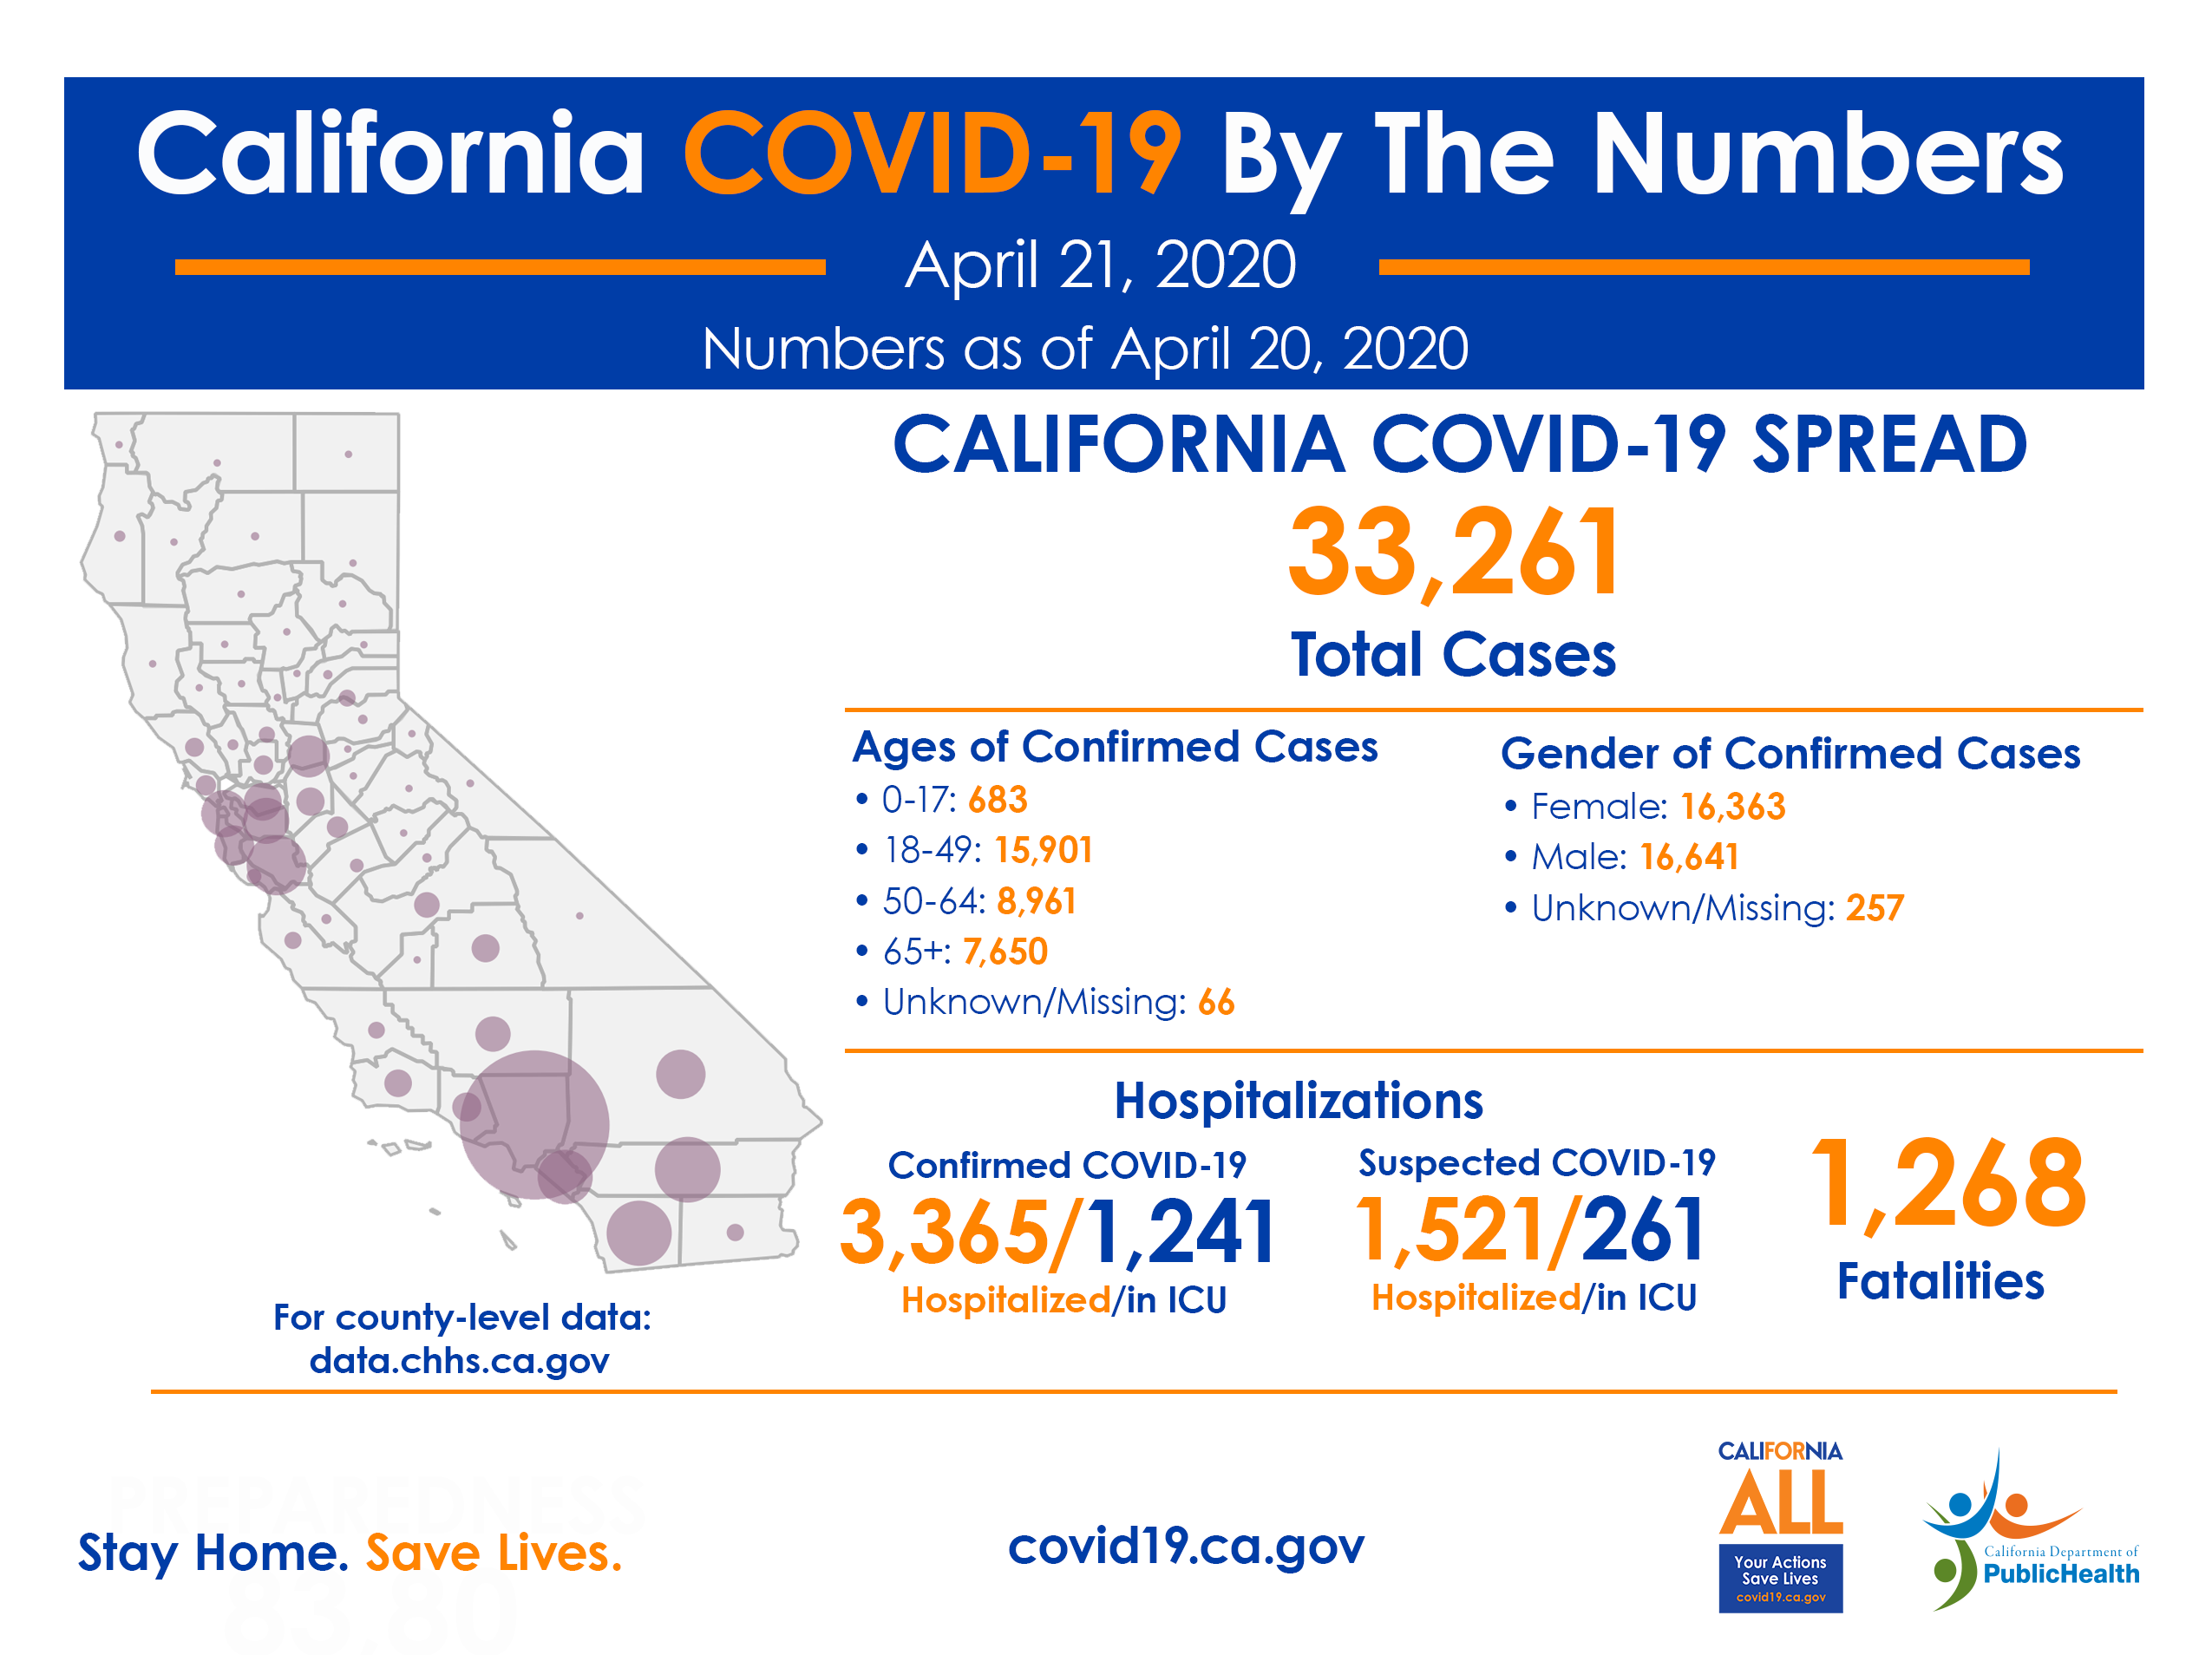 California COVID-19 by the Numbers as of April 20, 2020